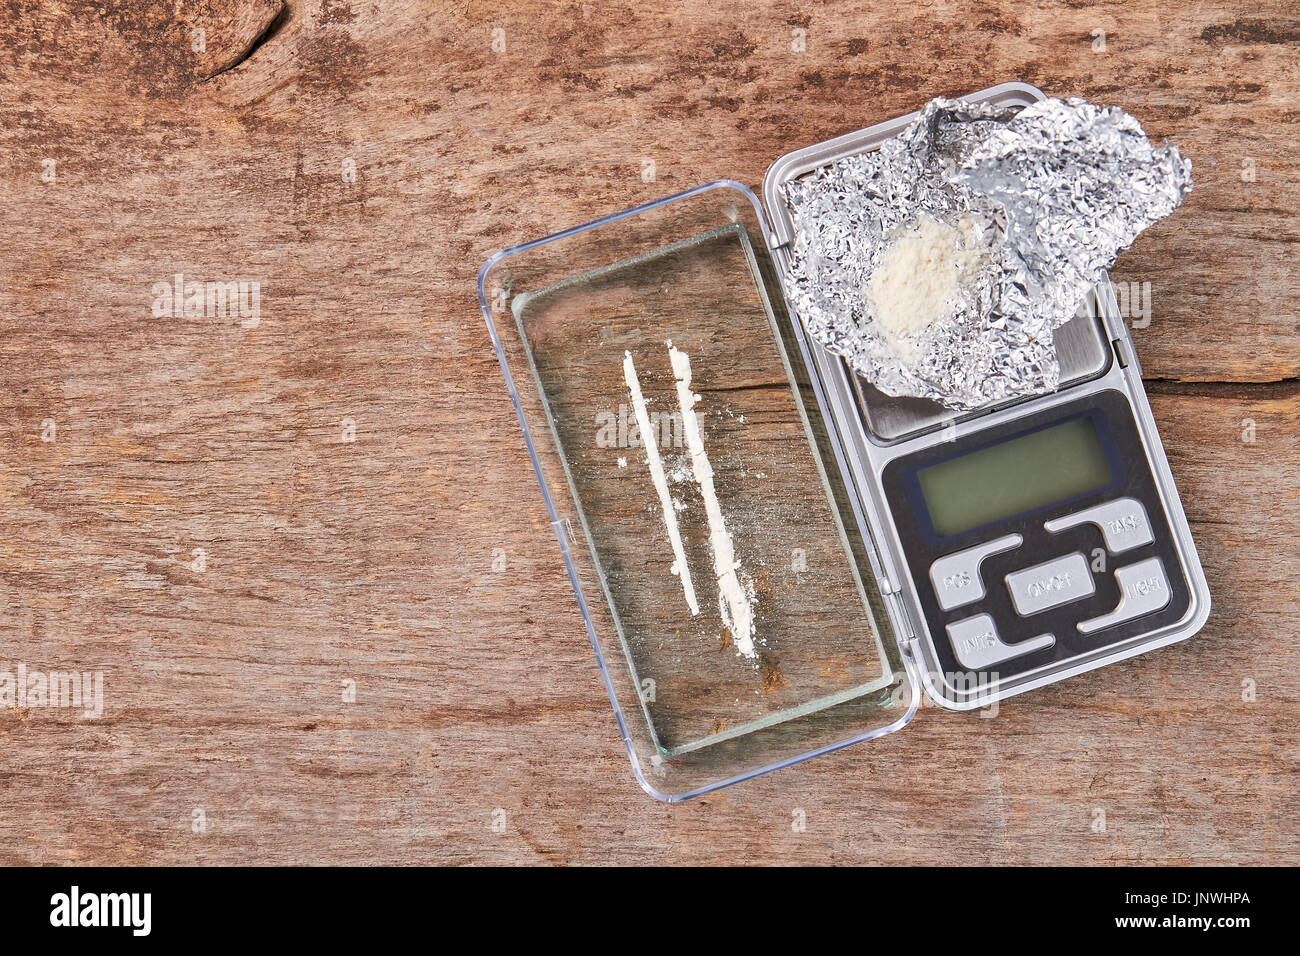 Digital equipment for drugs weight. Stock Photo